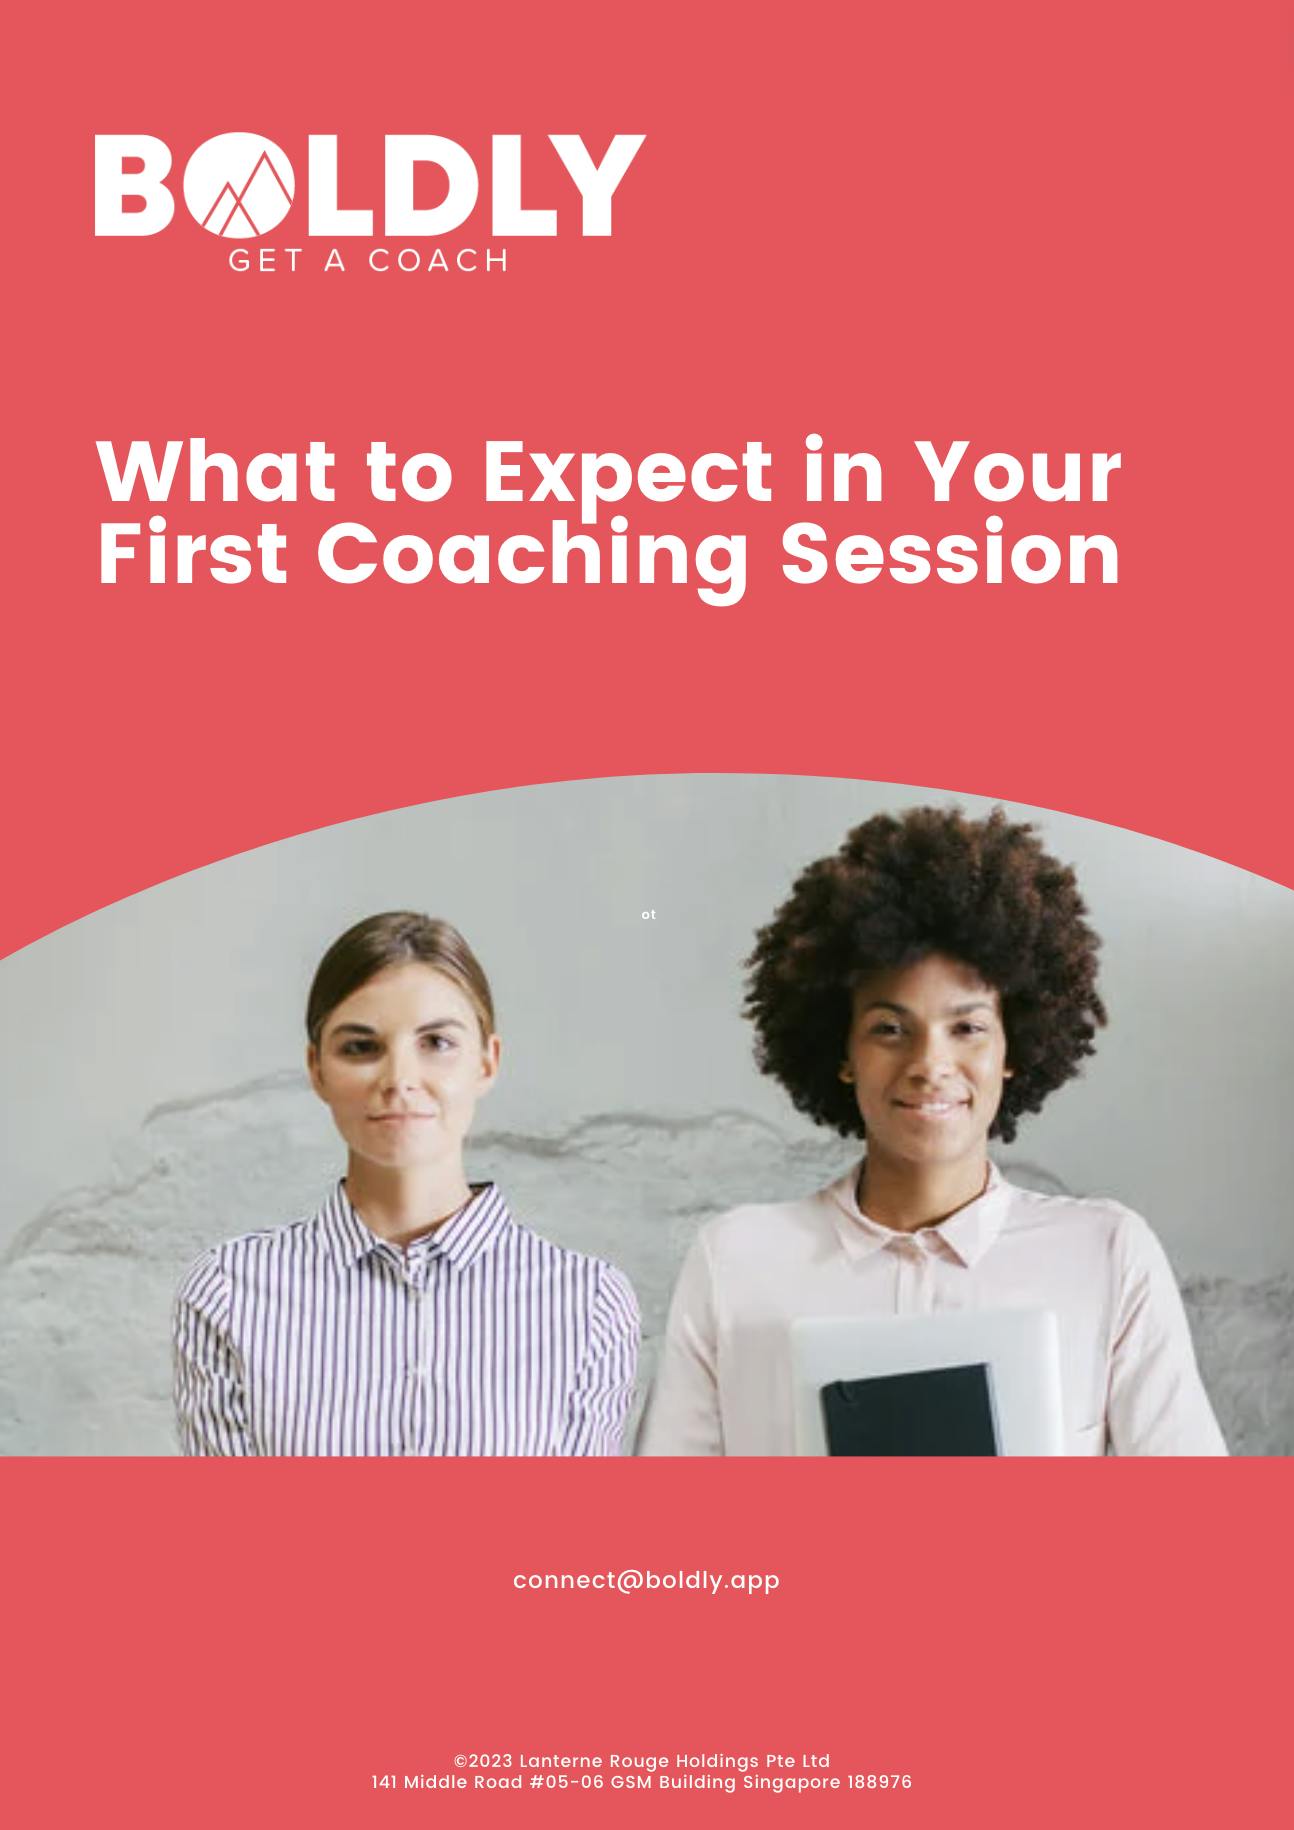 BOLDLY Explains what to expect in your first coaching session